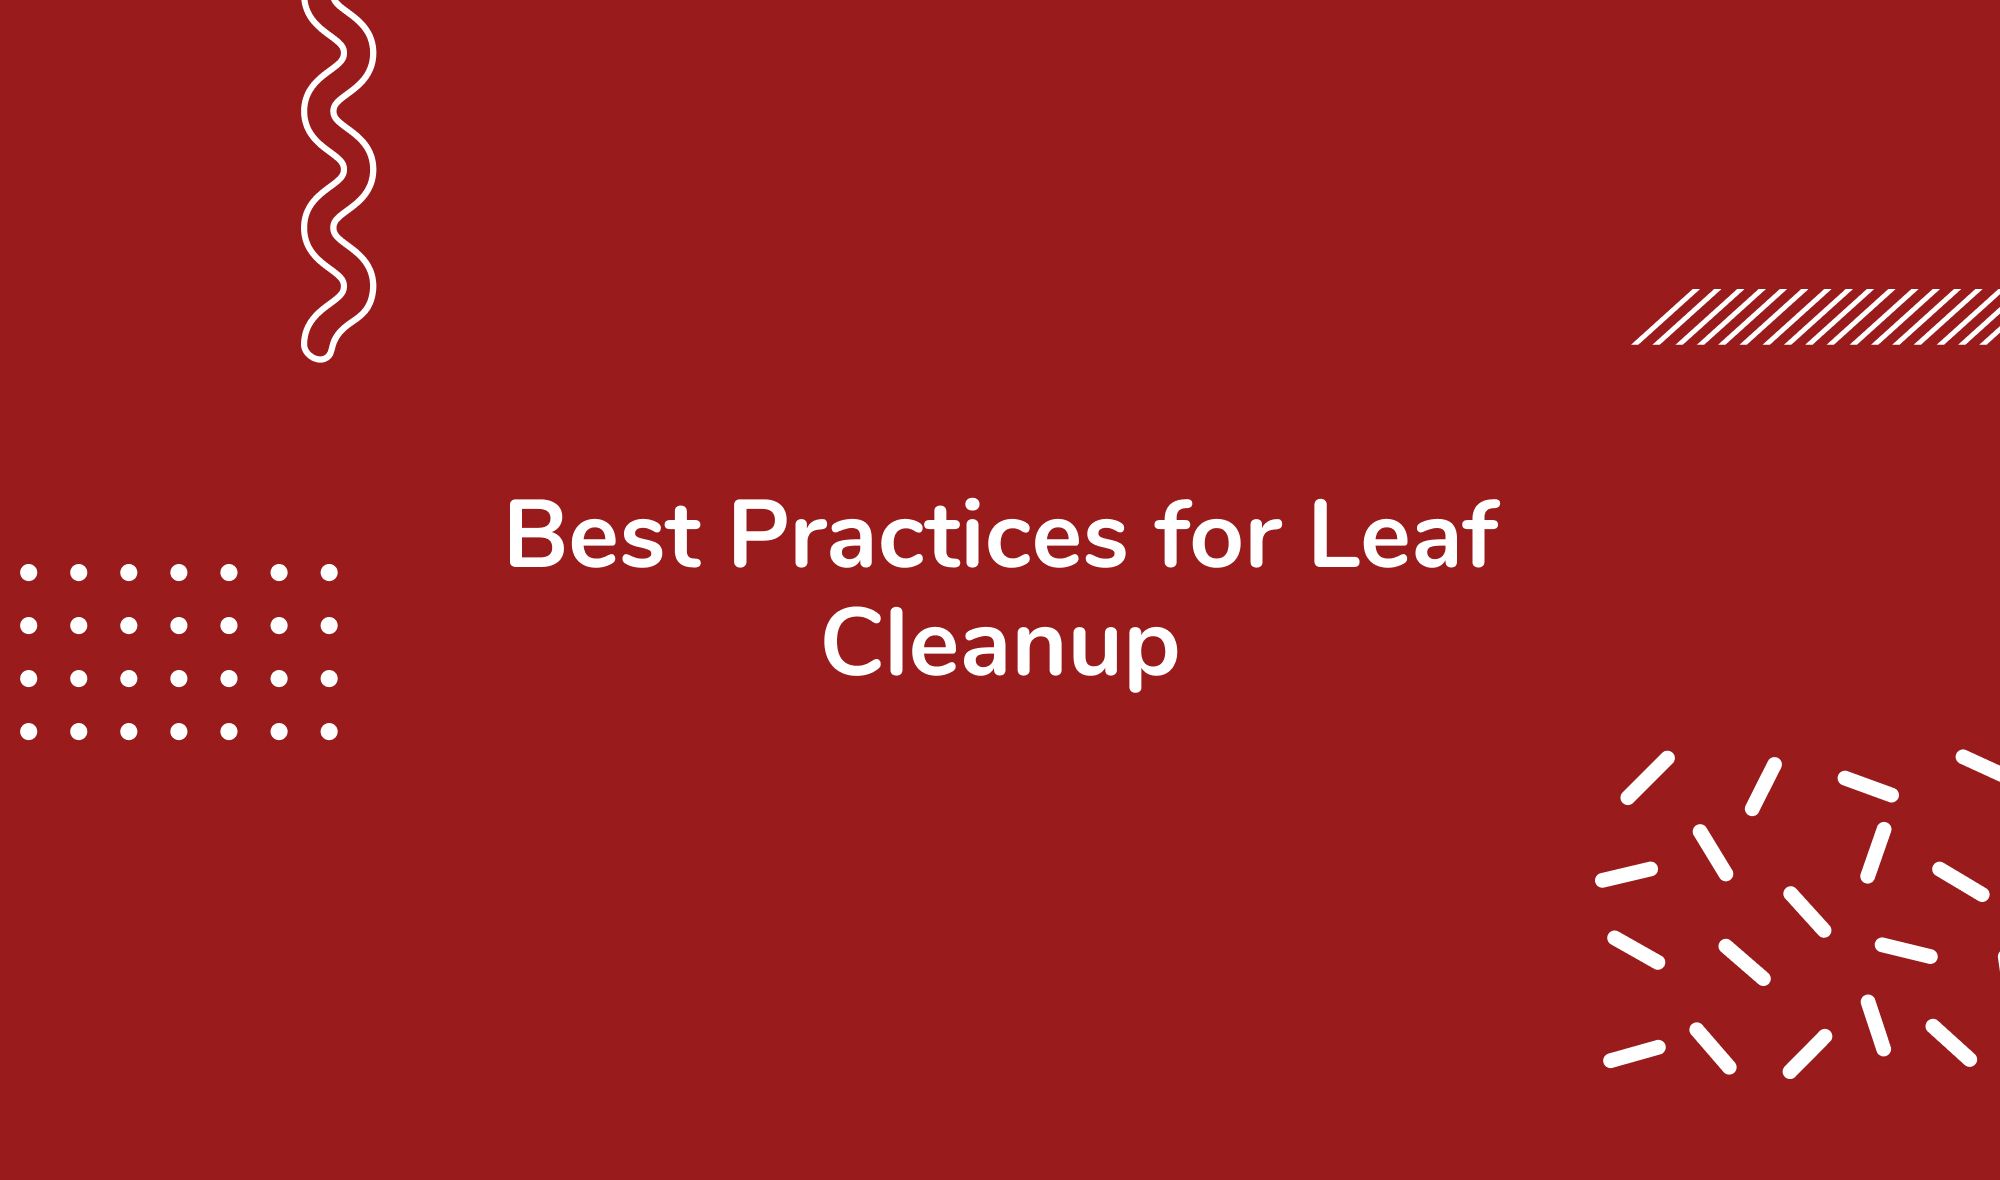 Best Practices for Leaf Cleanup